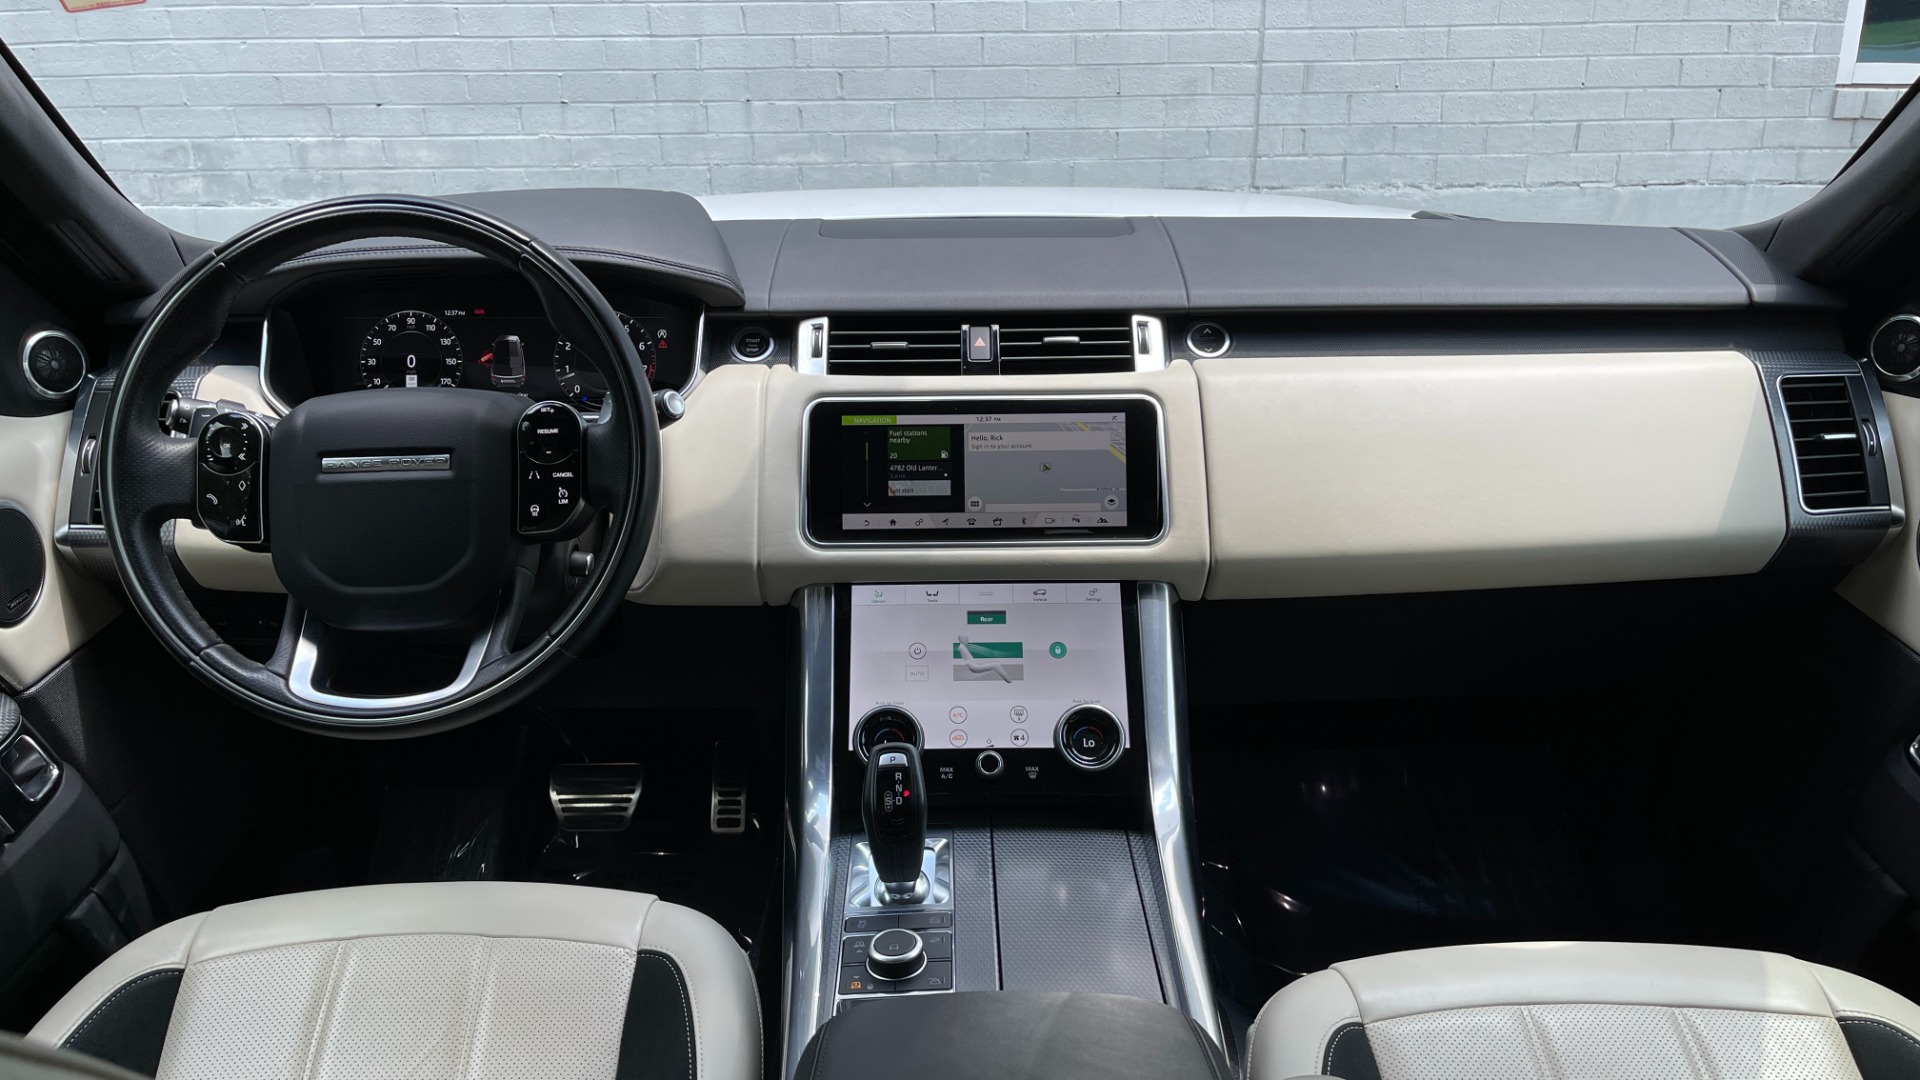 Used 2019 Land Rover Range Rover Sport DYNAMIC / BLACKOUT PACK / VISION ASSIST / 22IN WHEELS for sale $81,999 at Formula Imports in Charlotte NC 28227 38